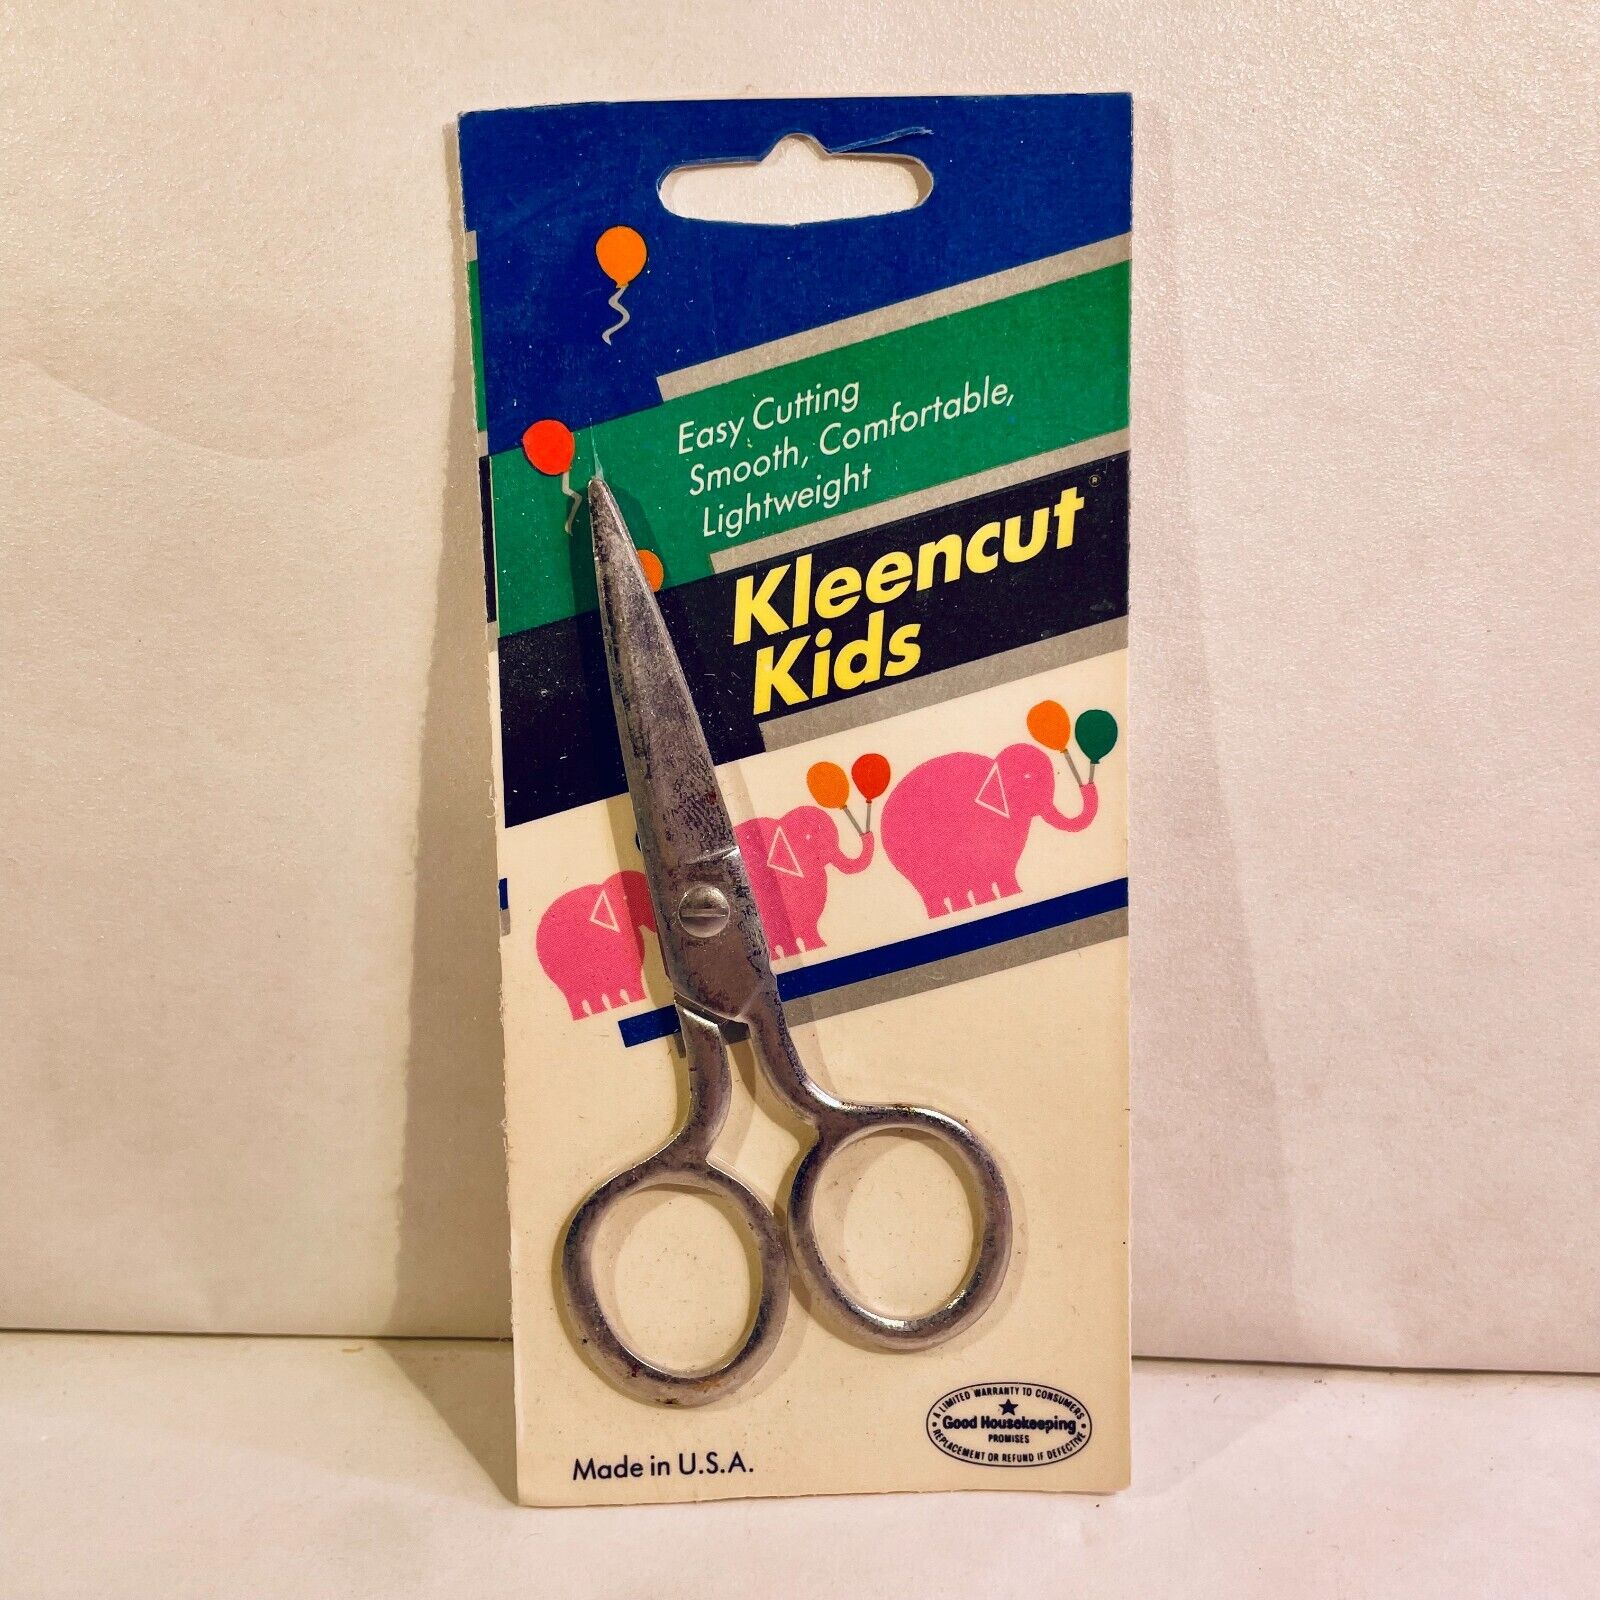 Vintage 1960s Kleencut Forged Steel Kids Scissor Pointed Tip 4” Made in USA